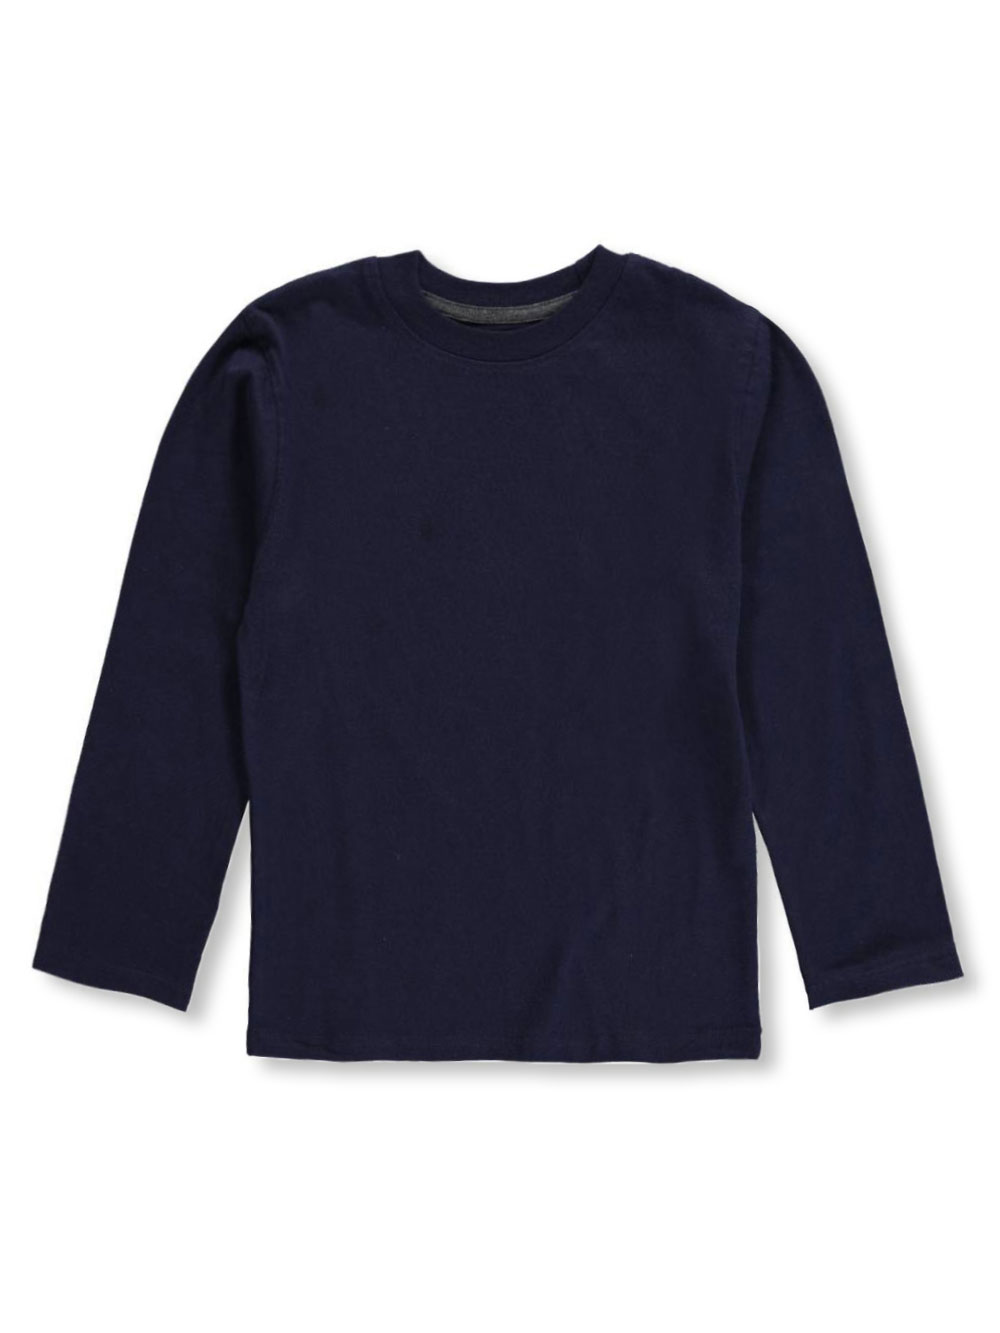 Size 5 T-Shirts For Boys